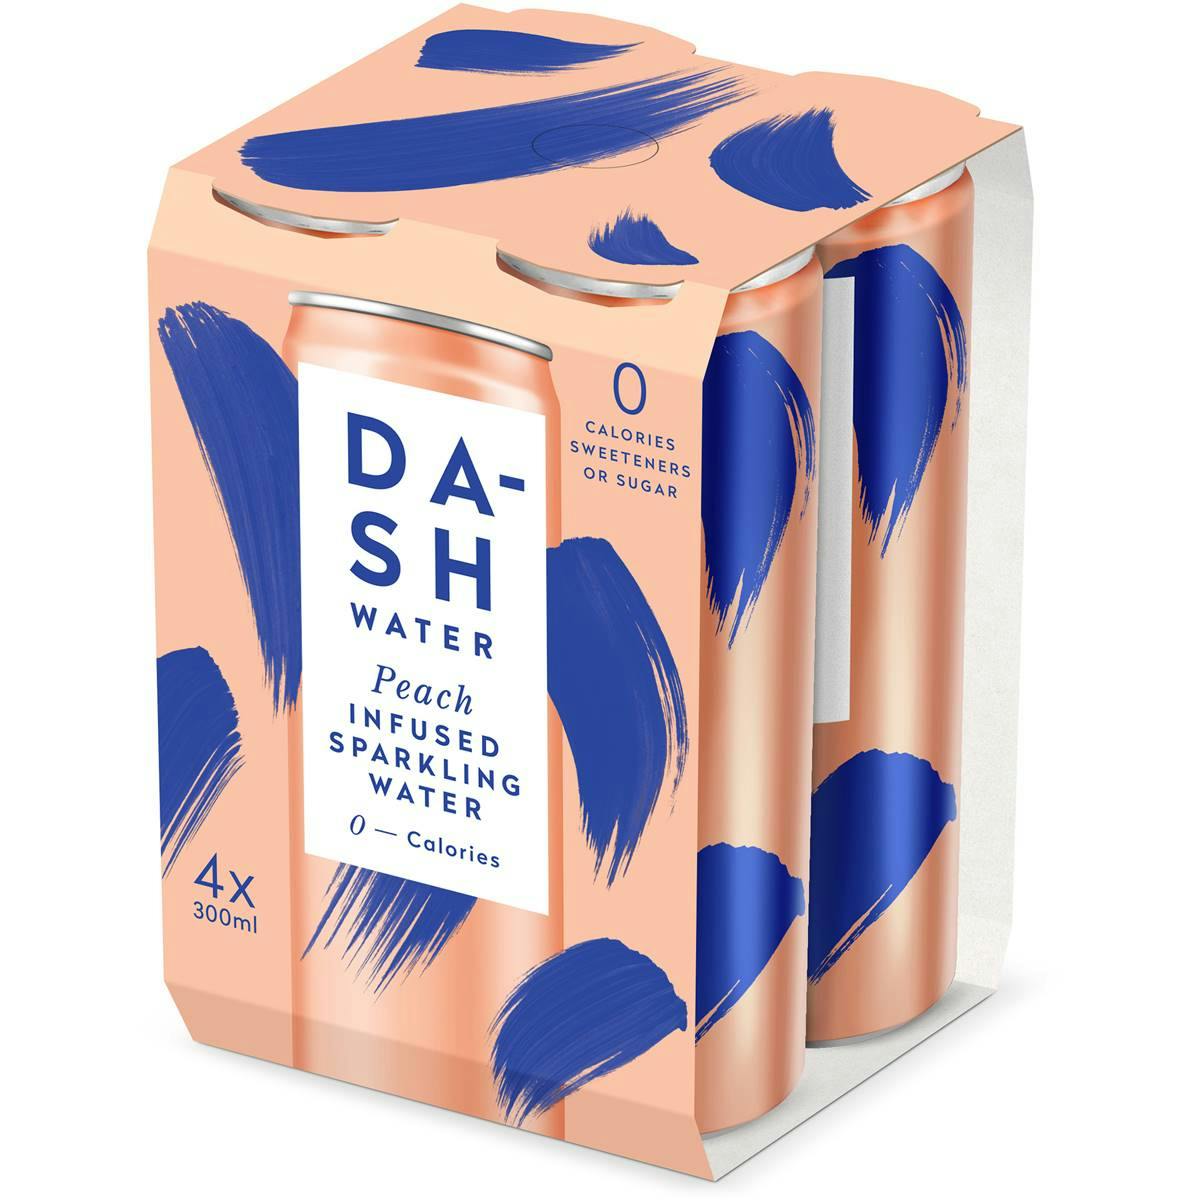 Dash Water Peach Infused Sparkling Water 300ml X4